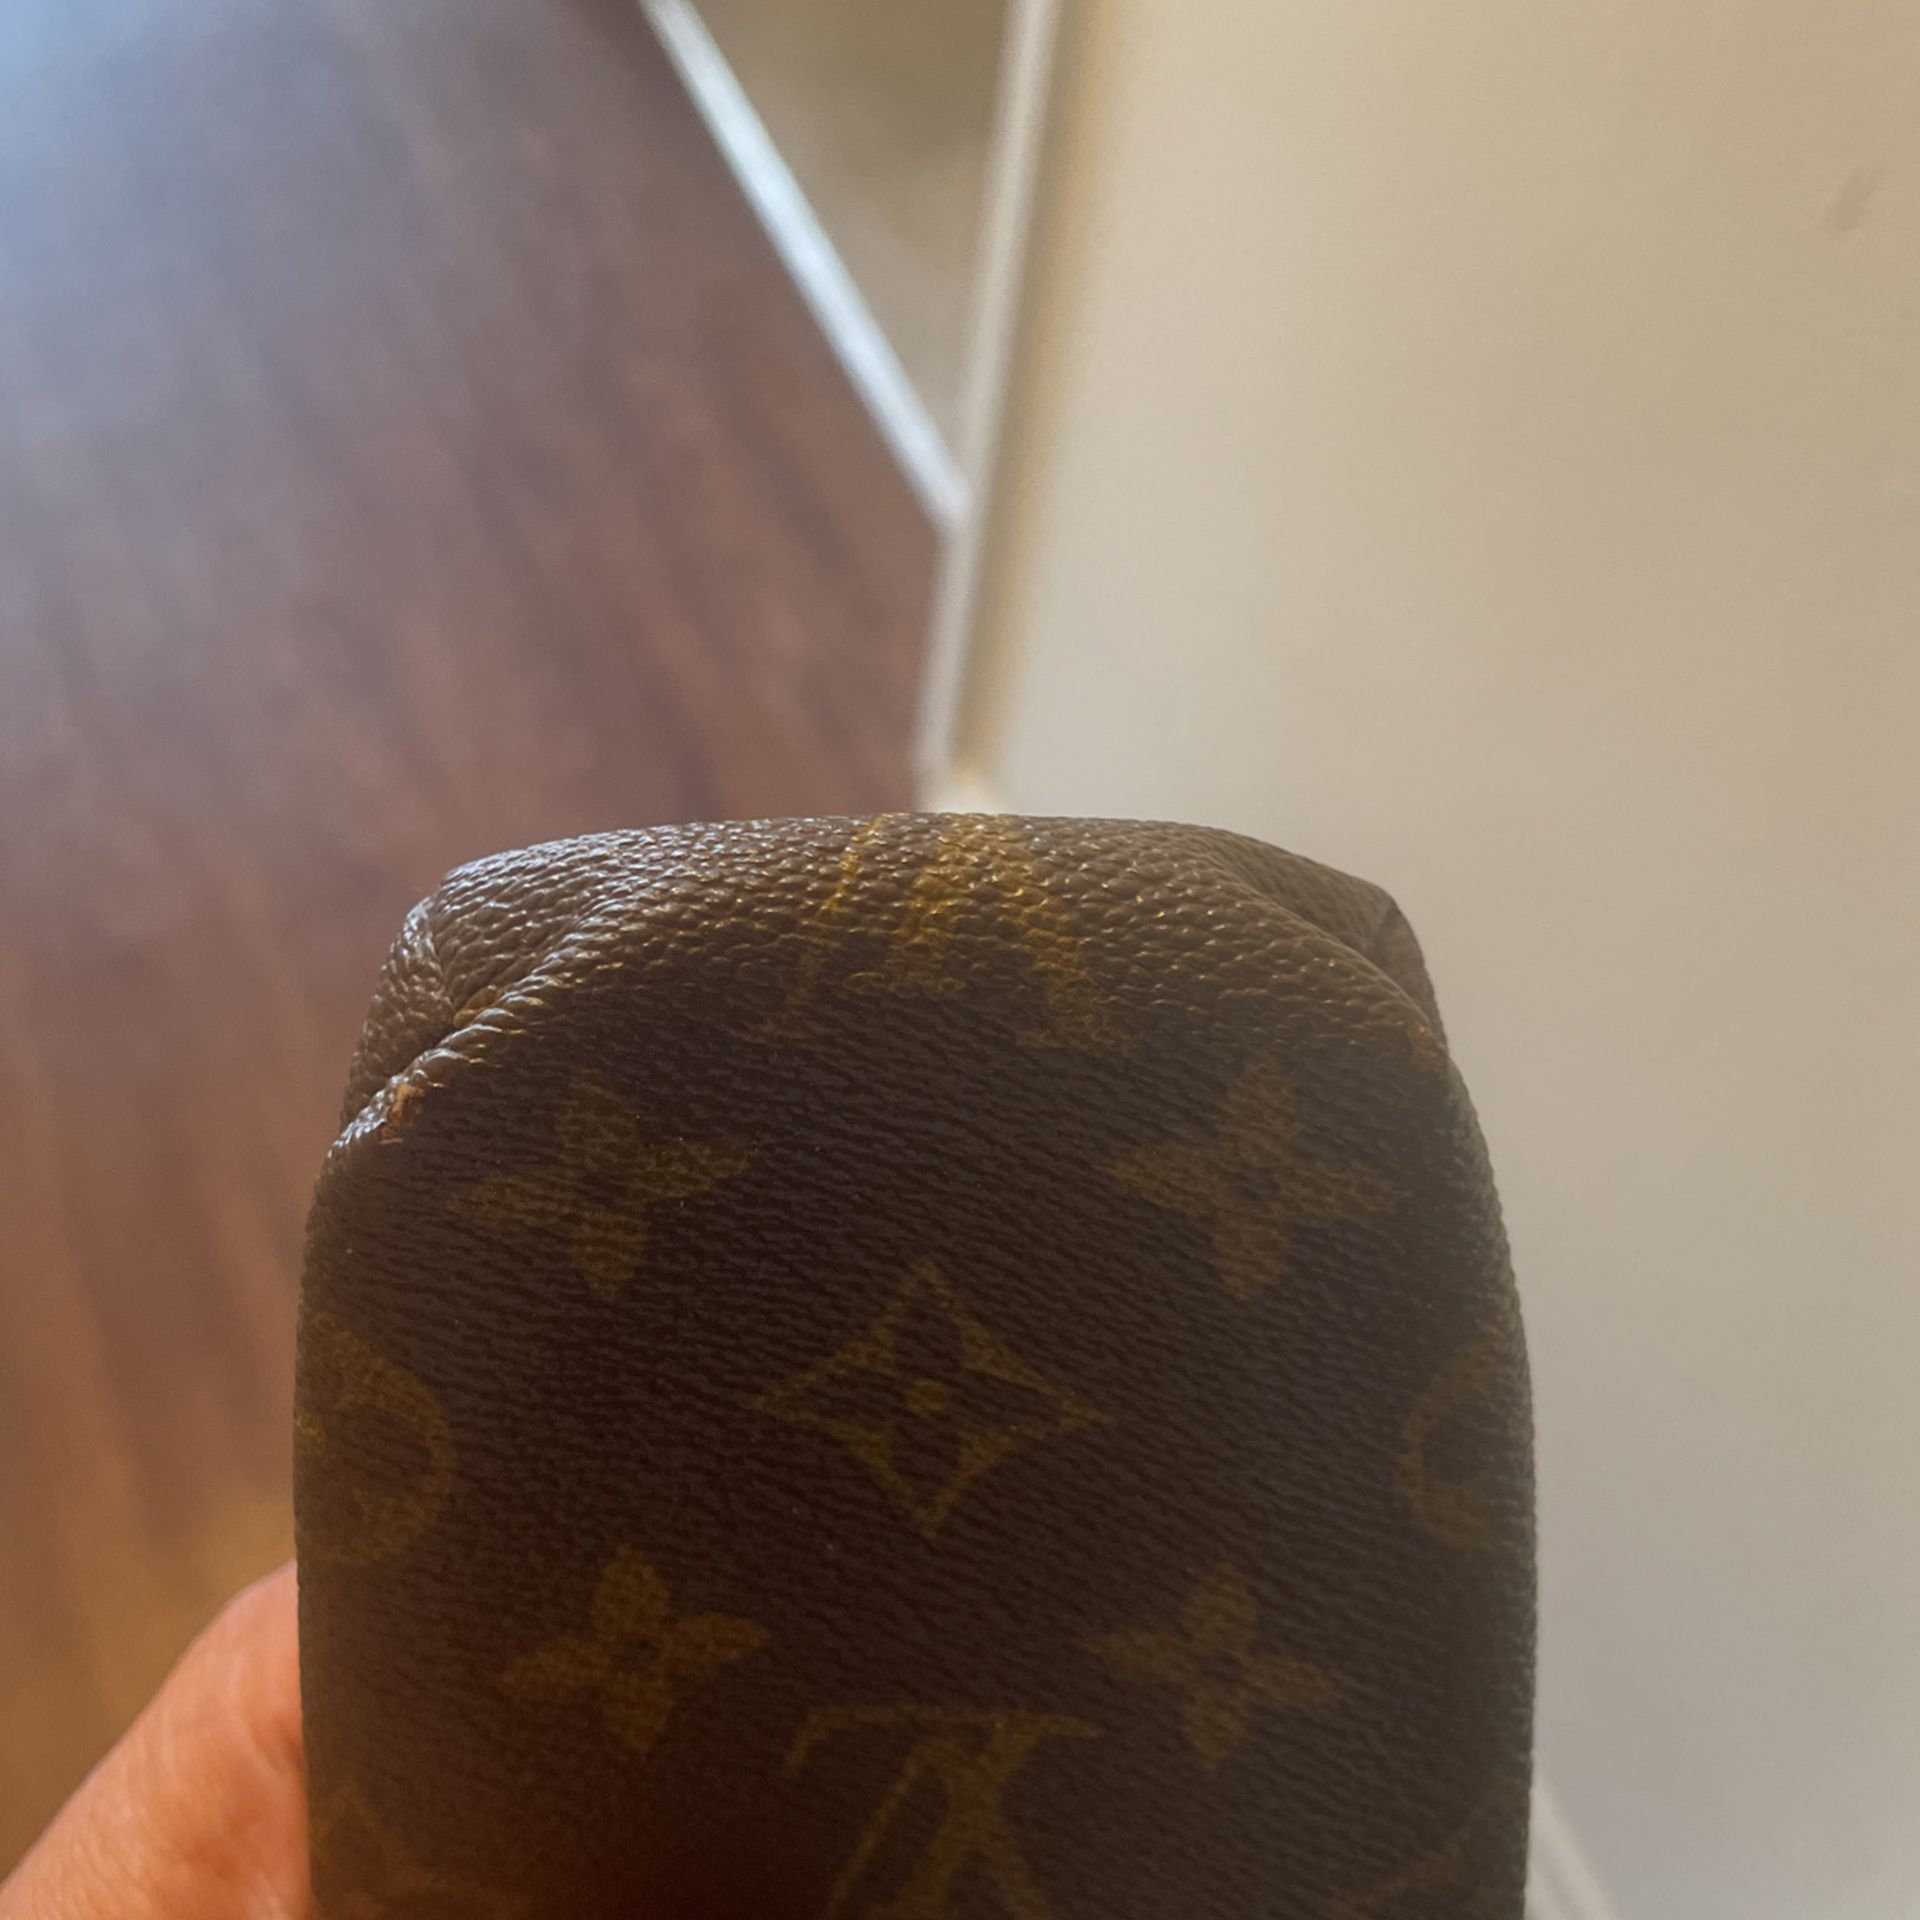 Louis Vuitton cigarettes and lighter case for Sale in Campbell, CA - OfferUp